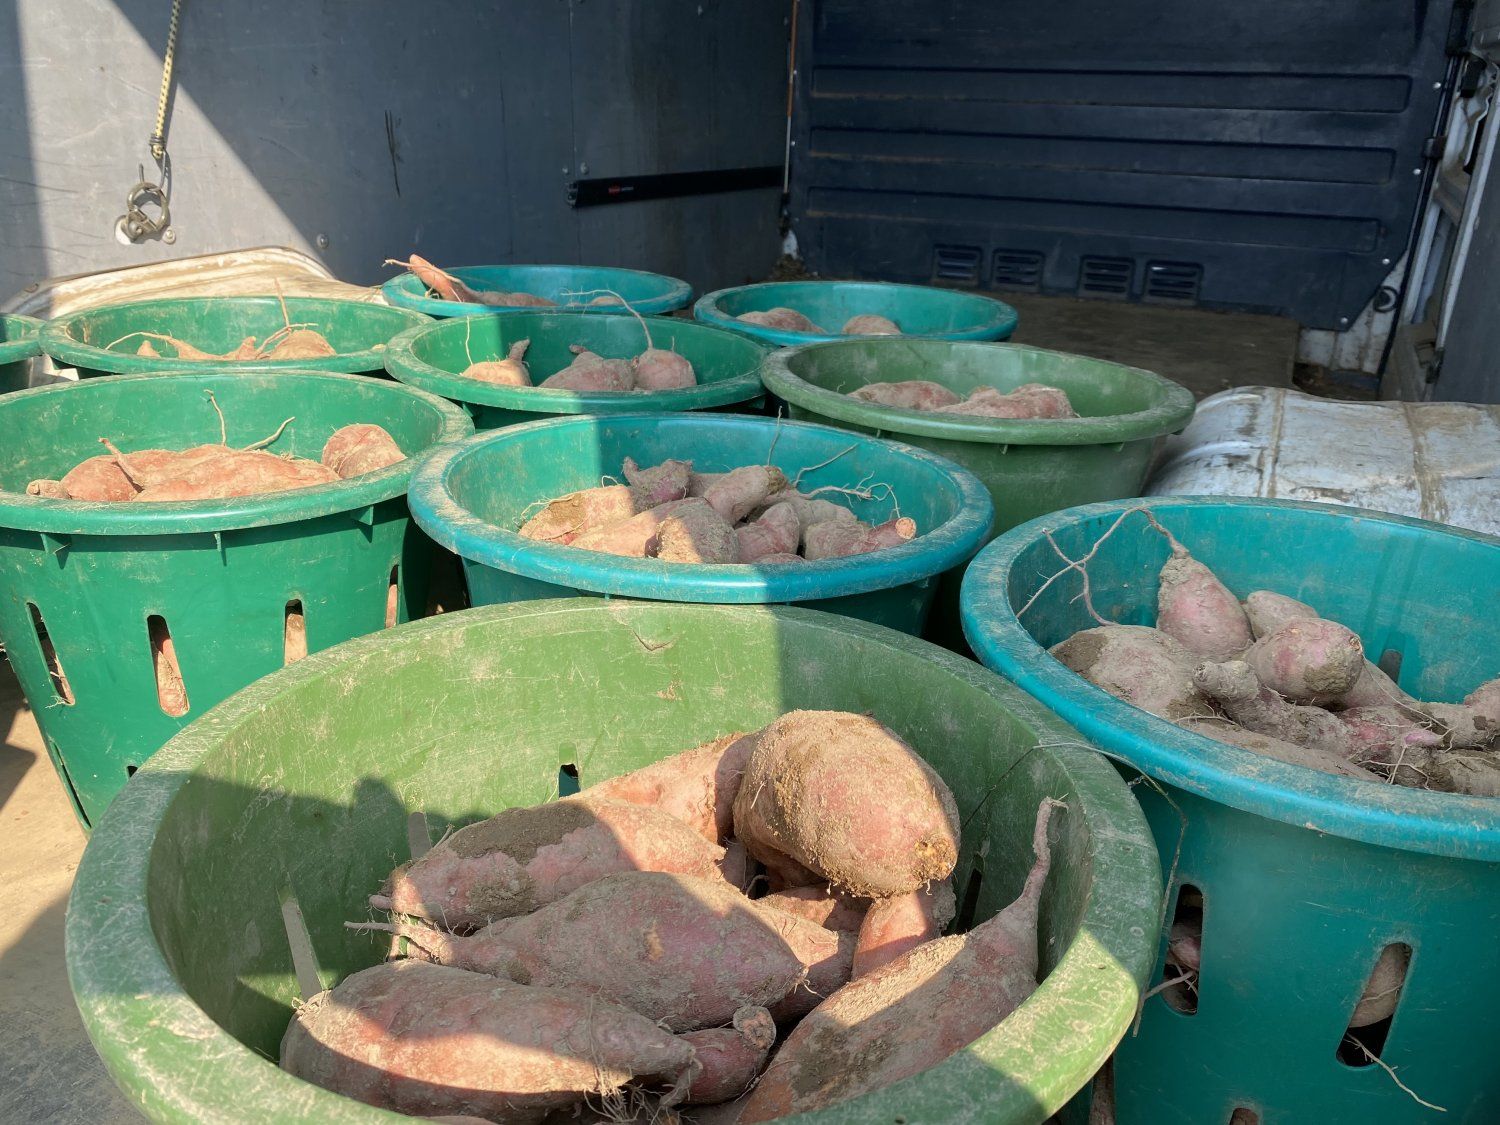 Previous Happening: Autumn Week 3:  Get Ready for A Steady Diet of Sweet Potatoes!